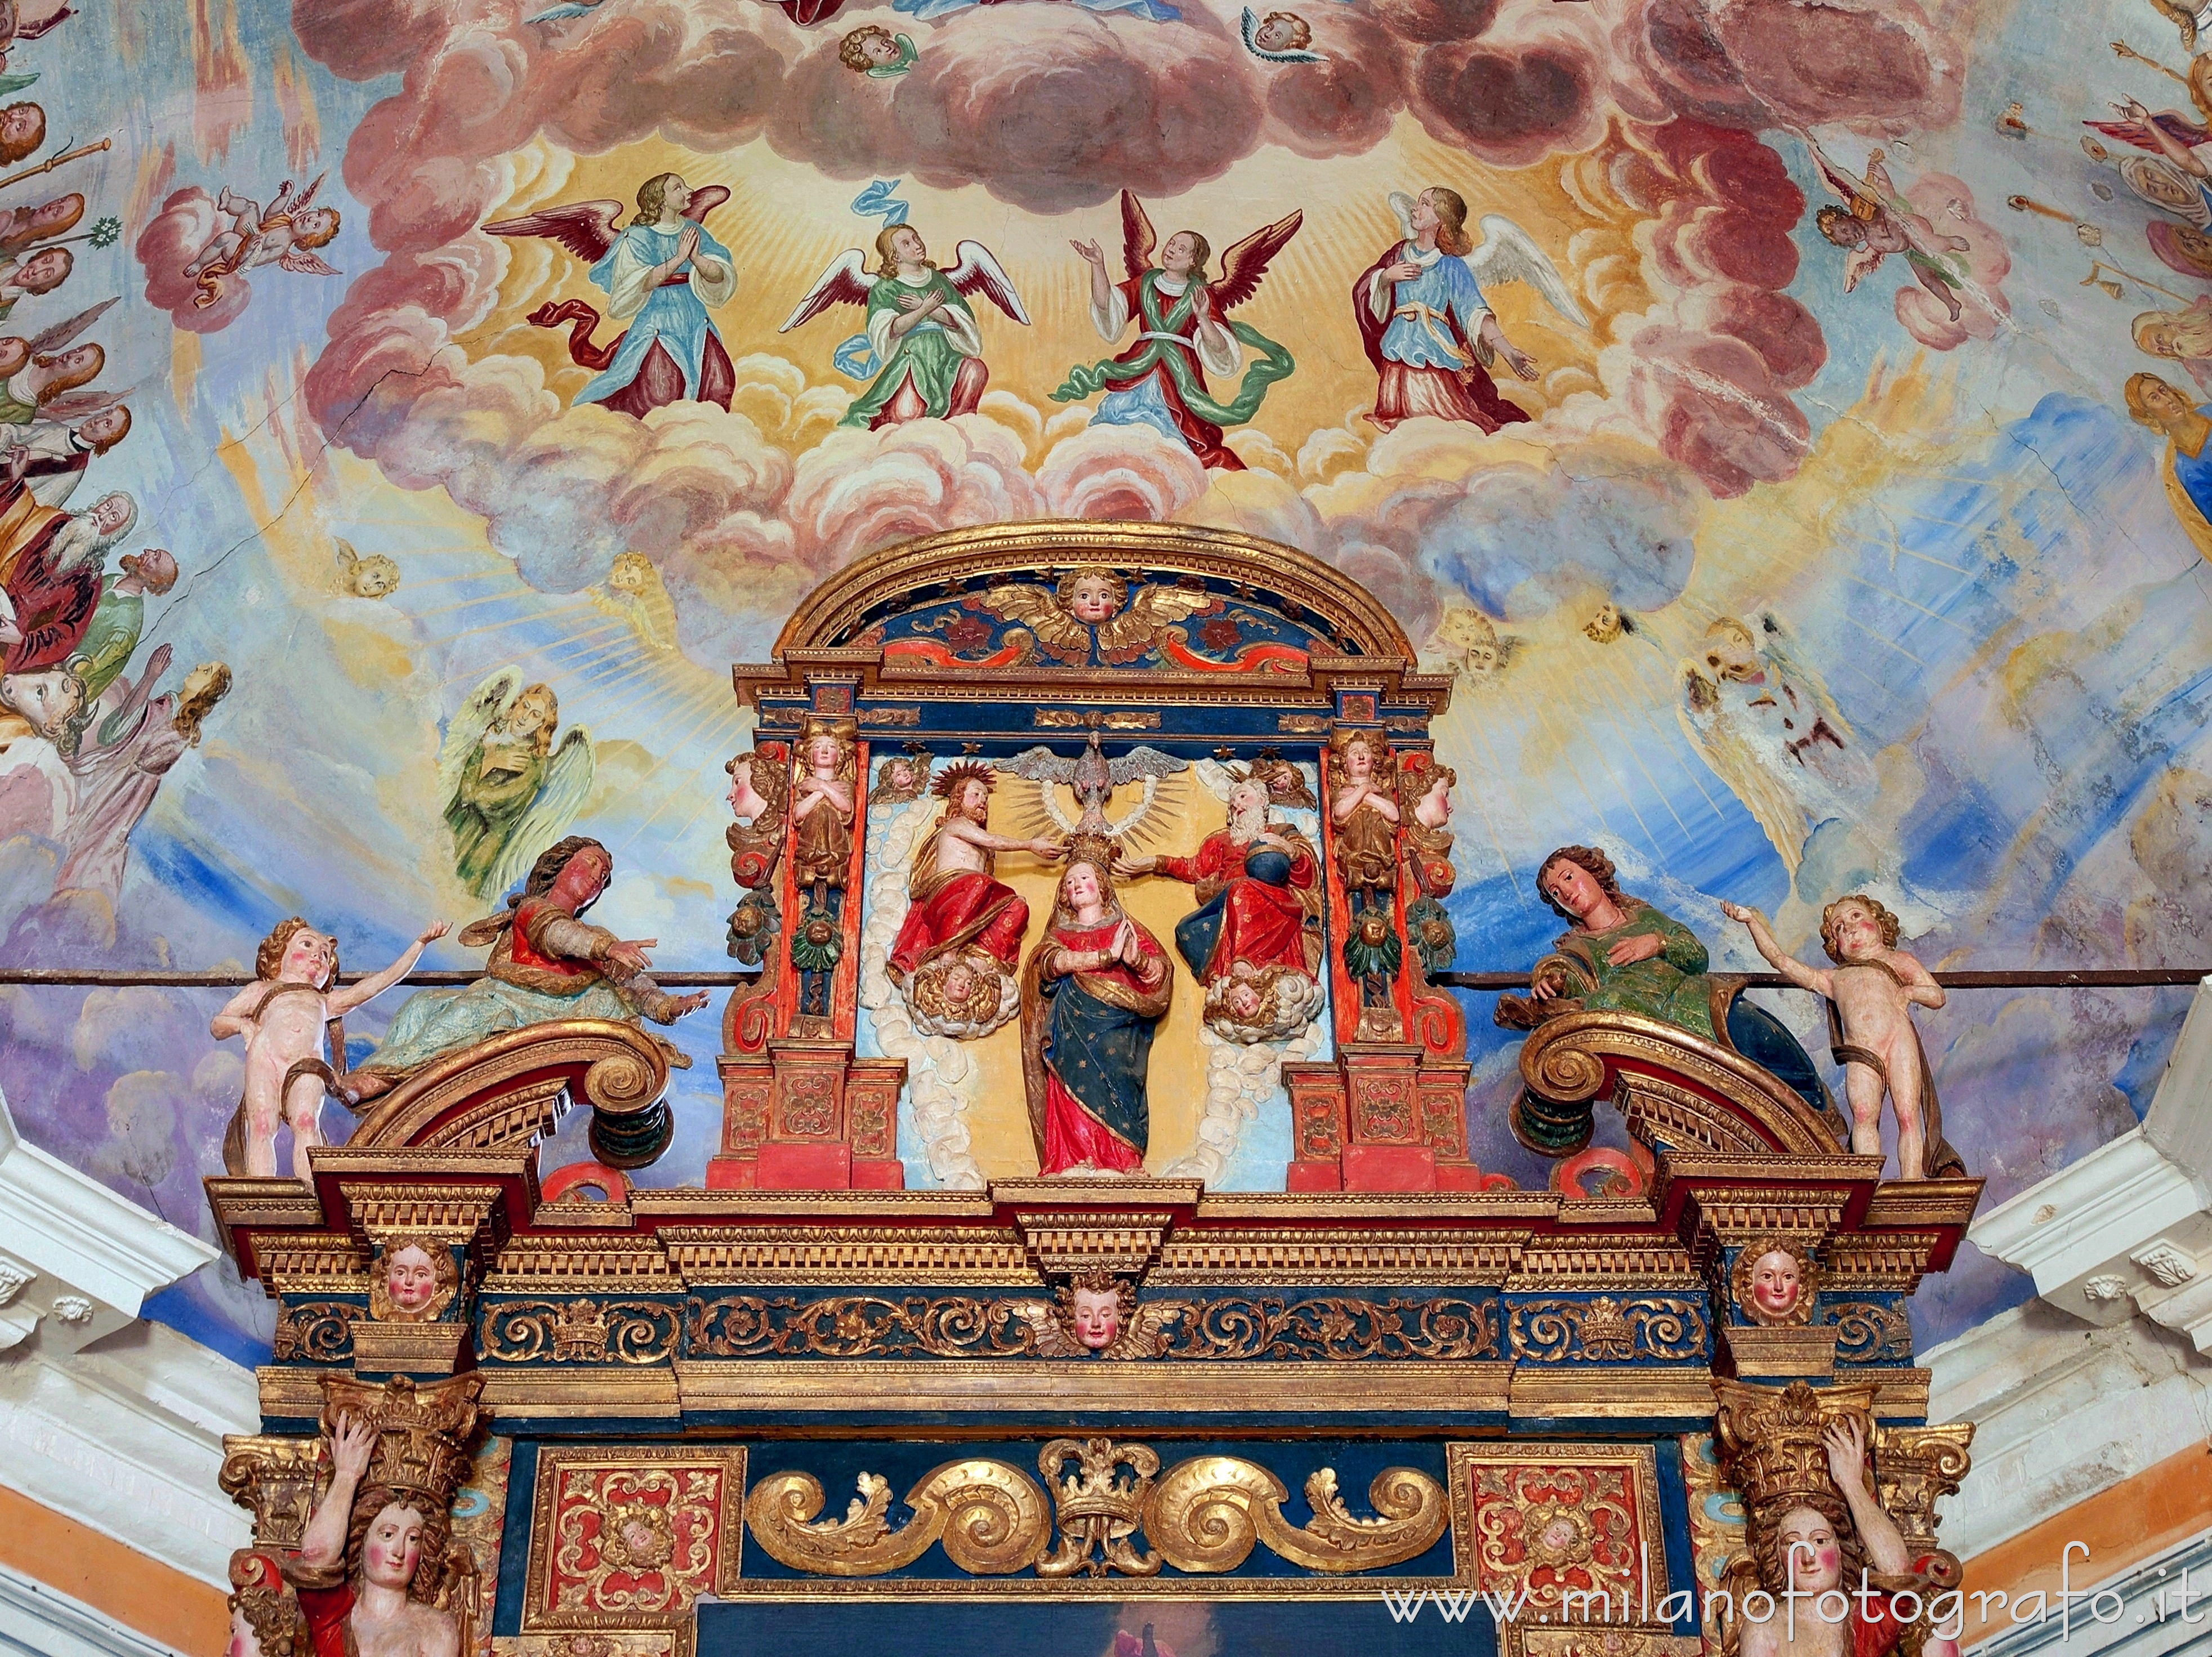 Trivero (Biella, Italy): Upper part of the retable of the altar of the Large Church of the Sanctuary of the Virgin of the Moorland - Trivero (Biella, Italy)